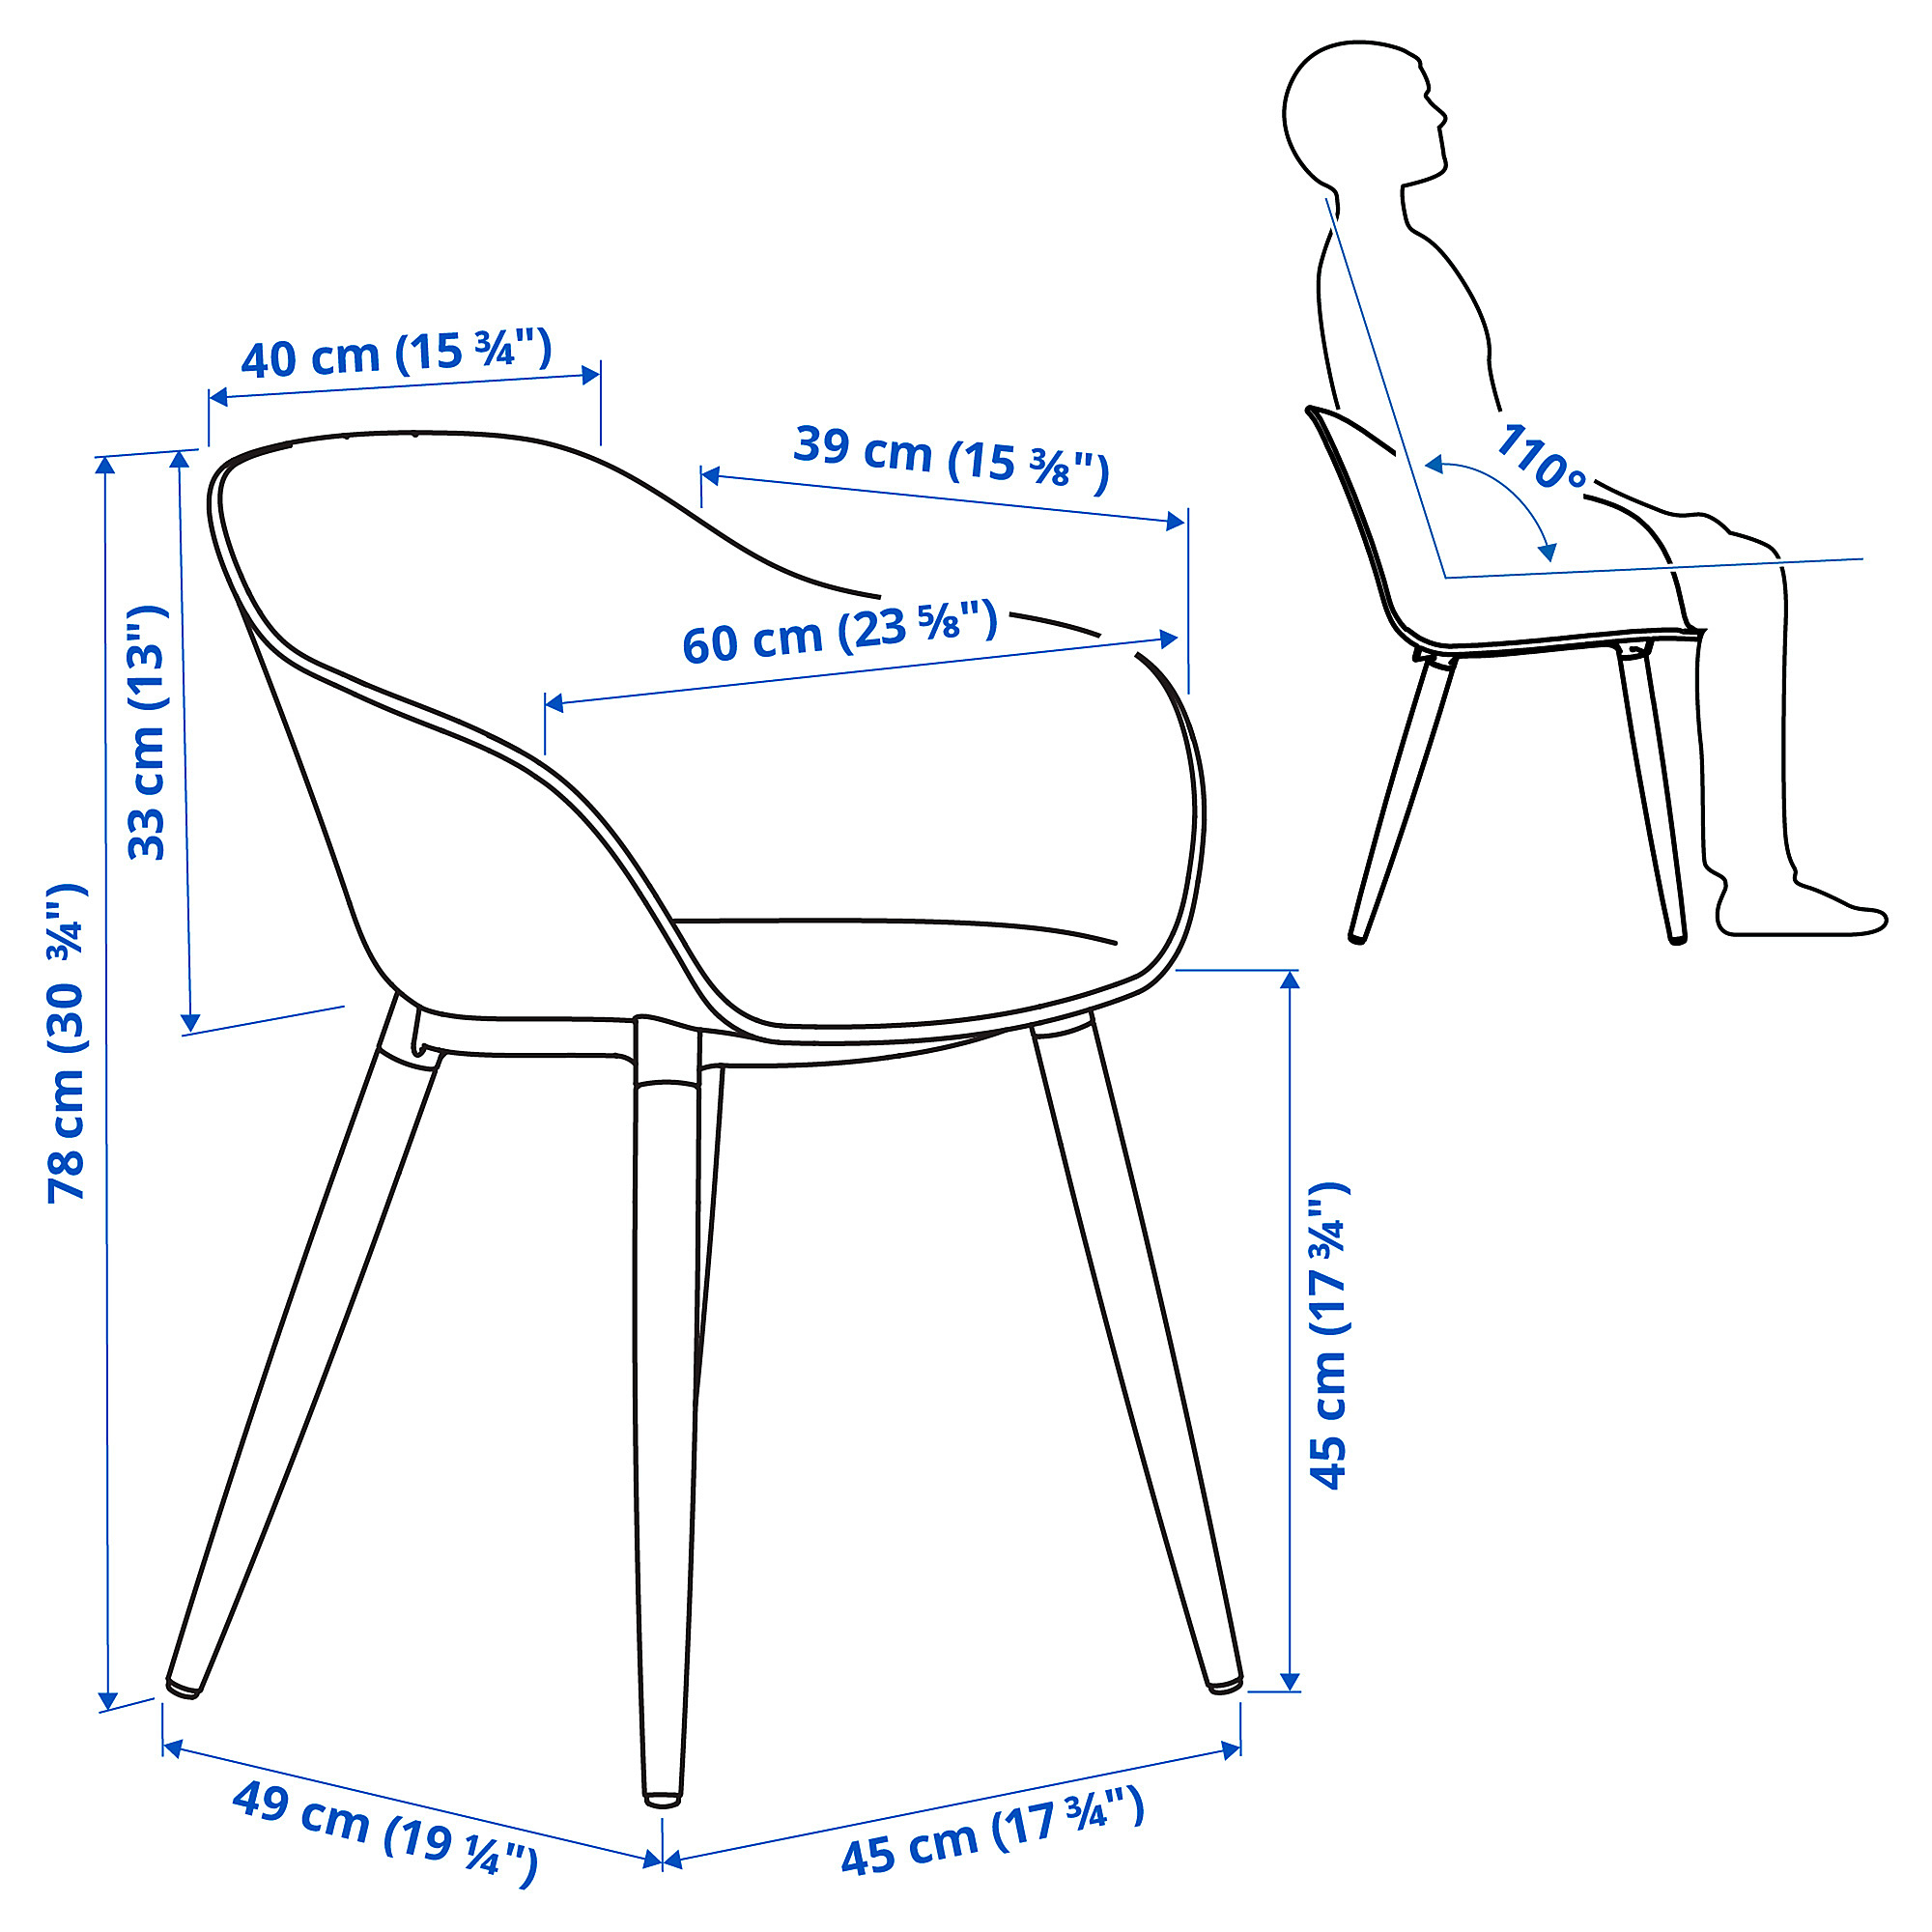 GRÖNSTA chair with armrests, in/outdoor